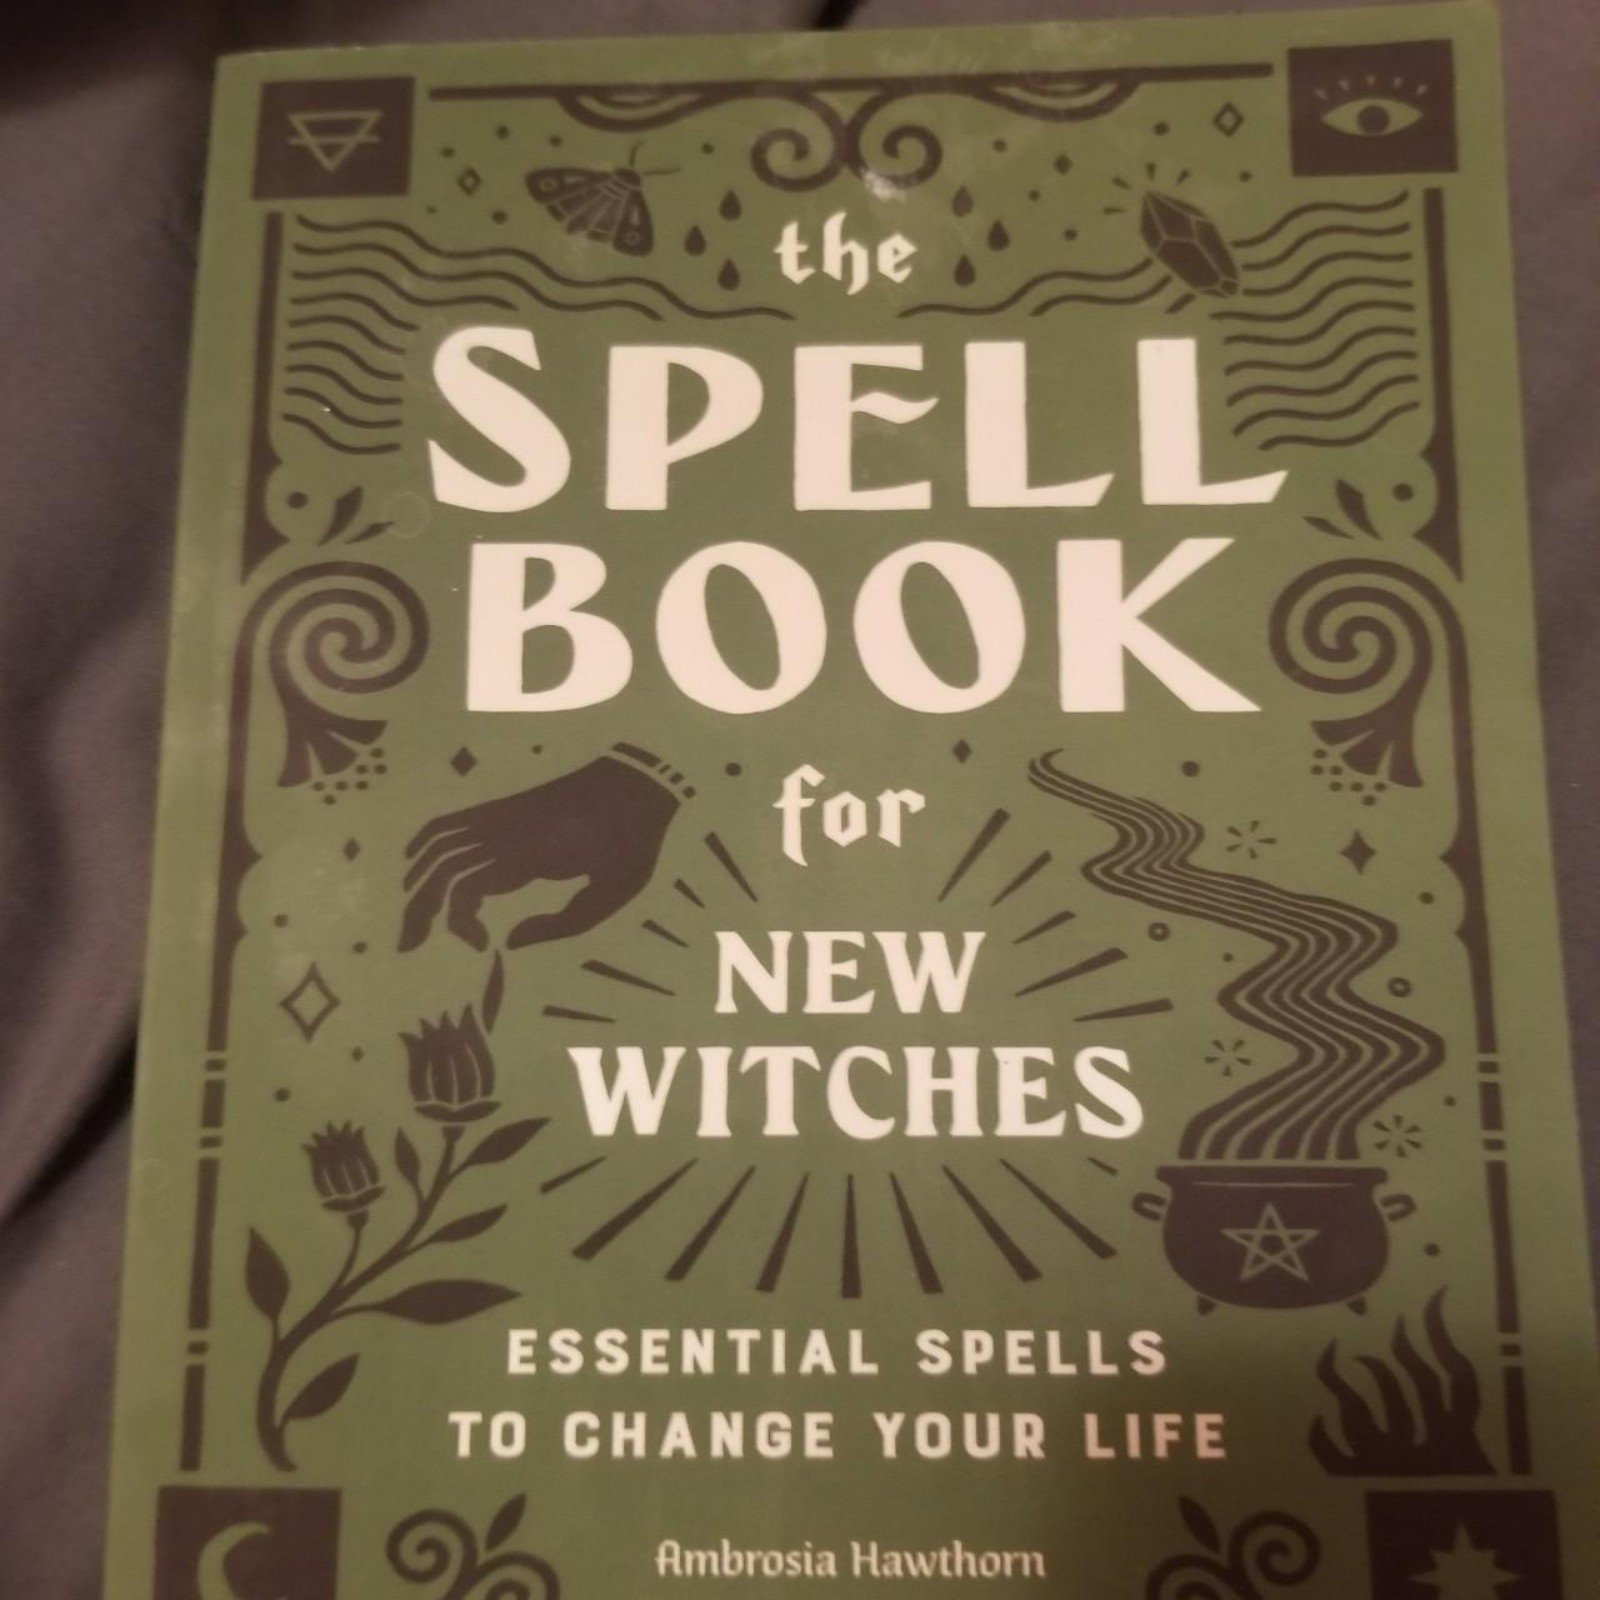 The spell book for new witches (essential spells to change your life) dPmOnsg28